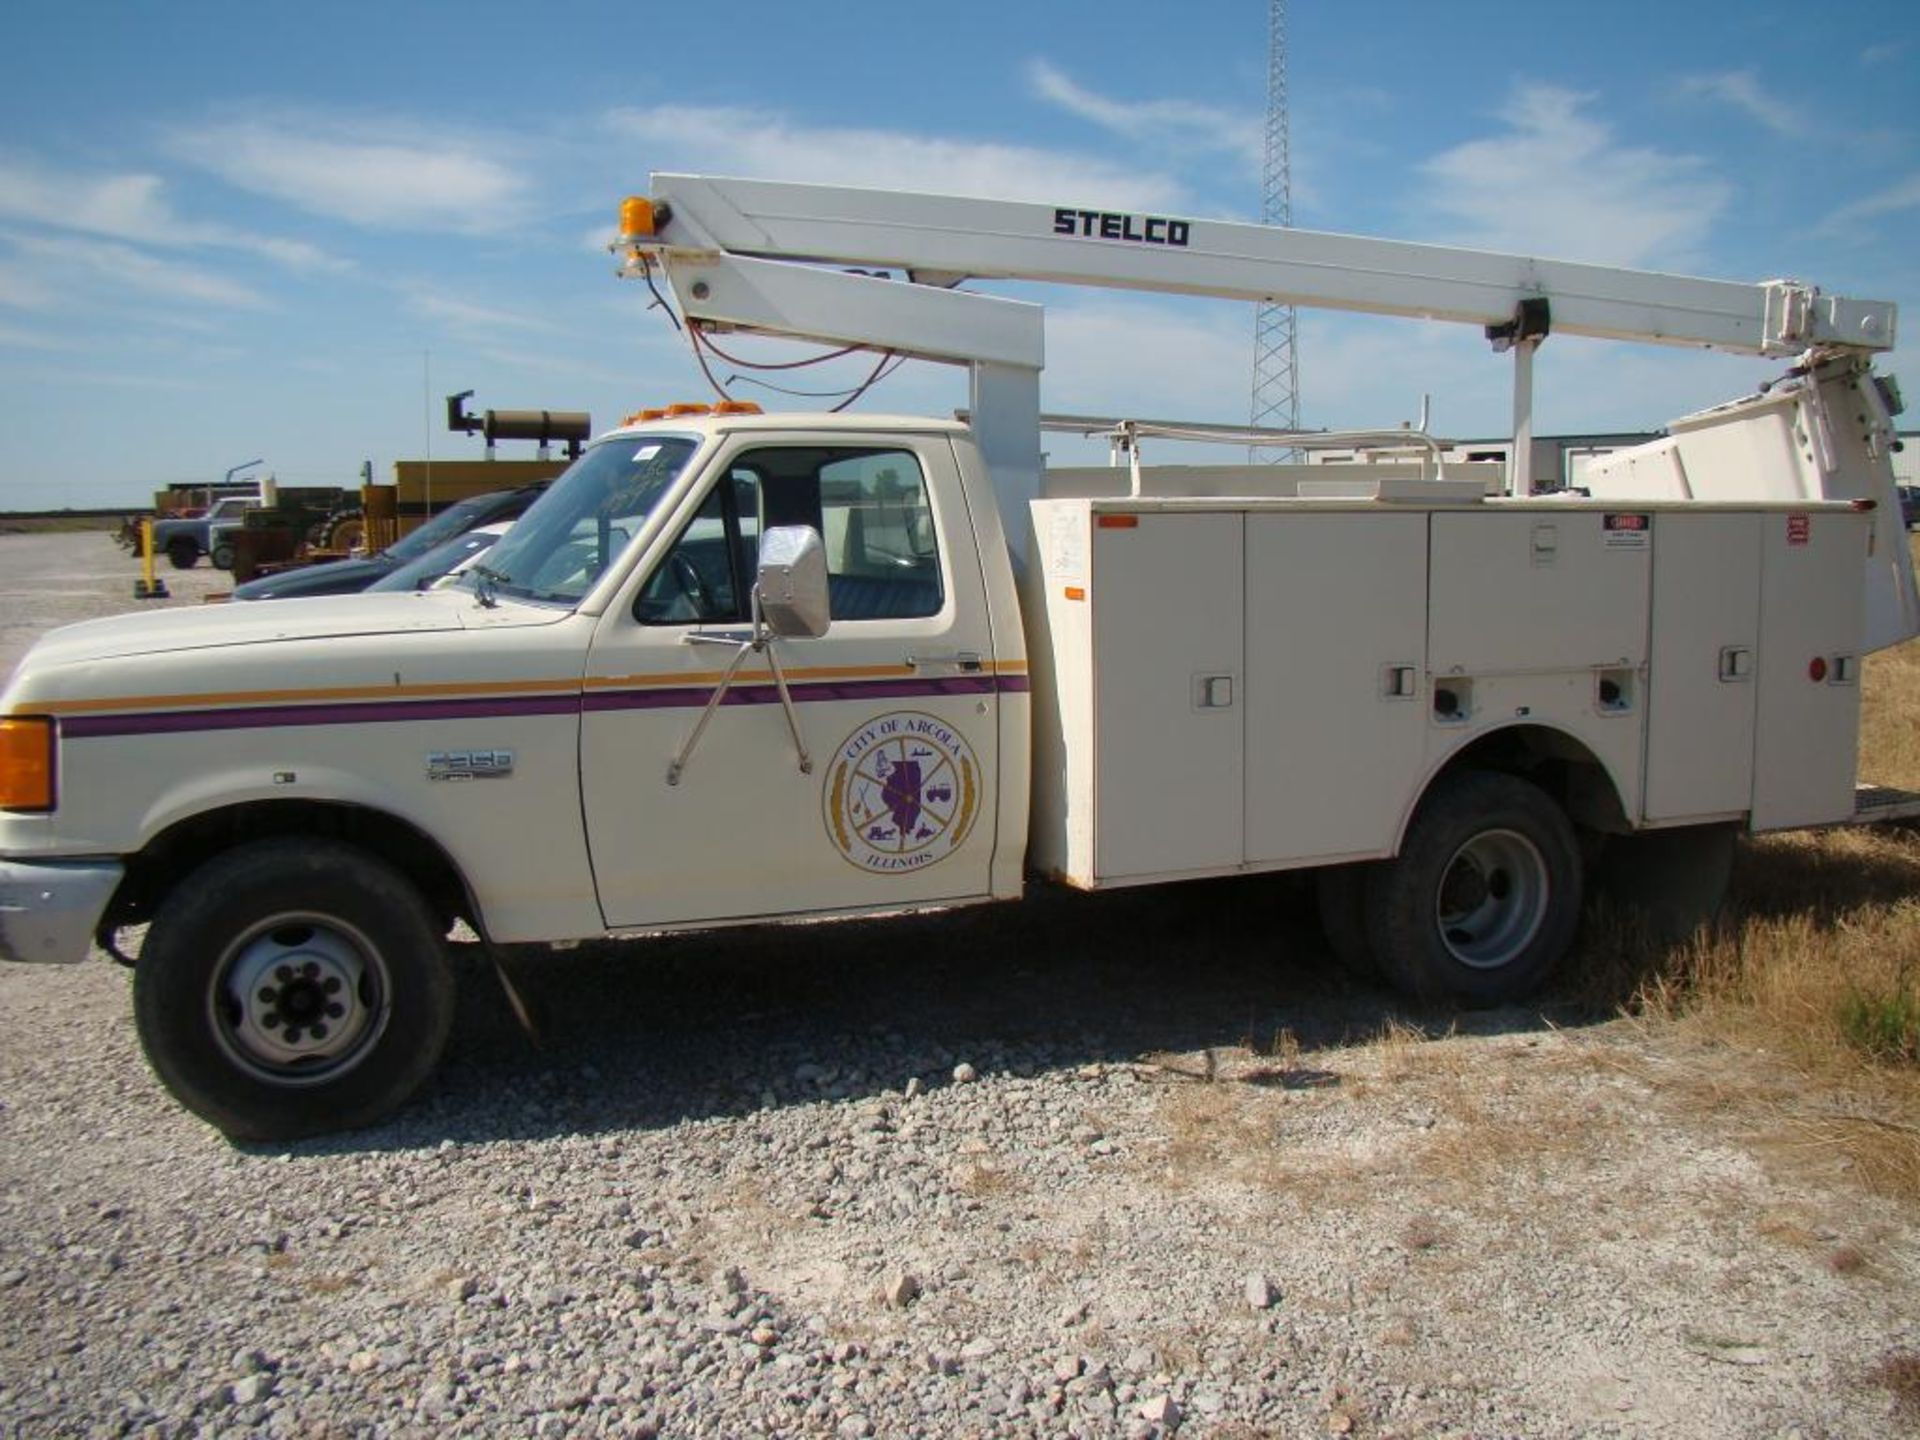 (Title) 1989 Ford F350 bucket truck, 7.3L diesel,4 speed with overdrive, Stelco bucket lift mofel - Image 6 of 18